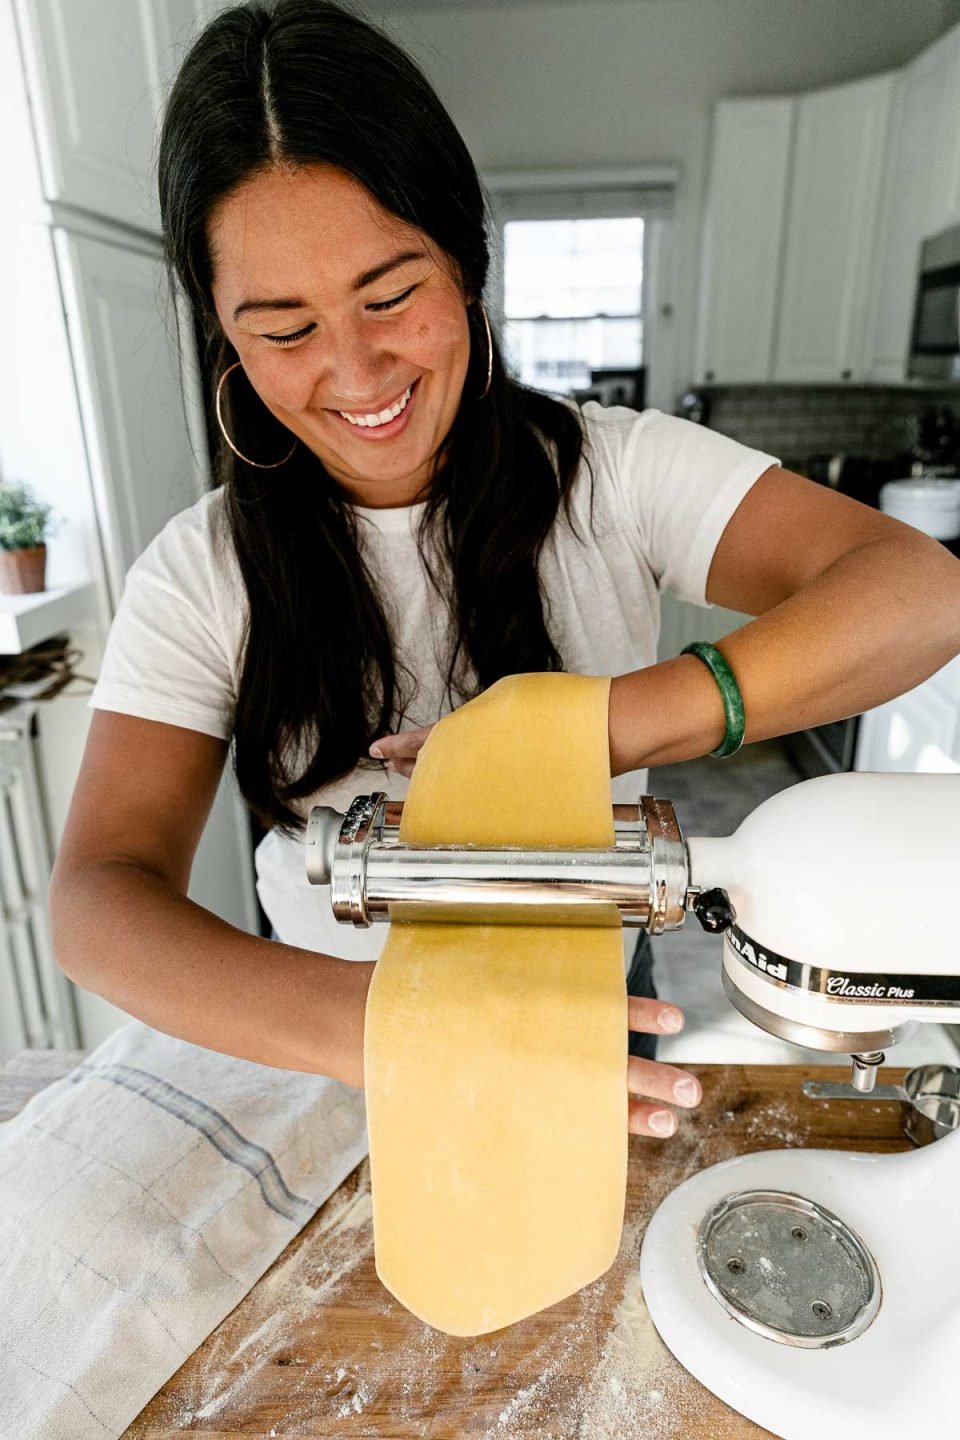 Jess of Plays Well With Butter smiles and looks downward as she rolls out pasta dough using a KitchenAid pasta rolling attachment. She uses her hands to feed a piece of homemade pasta dough through a pasta roller attachment connected to a KitchenAid Stand Mixer. Her top hand holds the sheet of dough that is being fed through the attachment while the back of her bottom hand is used to catch the pasta dough sheet that is being formed. The Stand Mixer rests atop a butcher block countertop. The countertop has been lightly dusted with flour and an aluminum baking sheet also sits on top of the countertop and is covered by a kitchen towel.